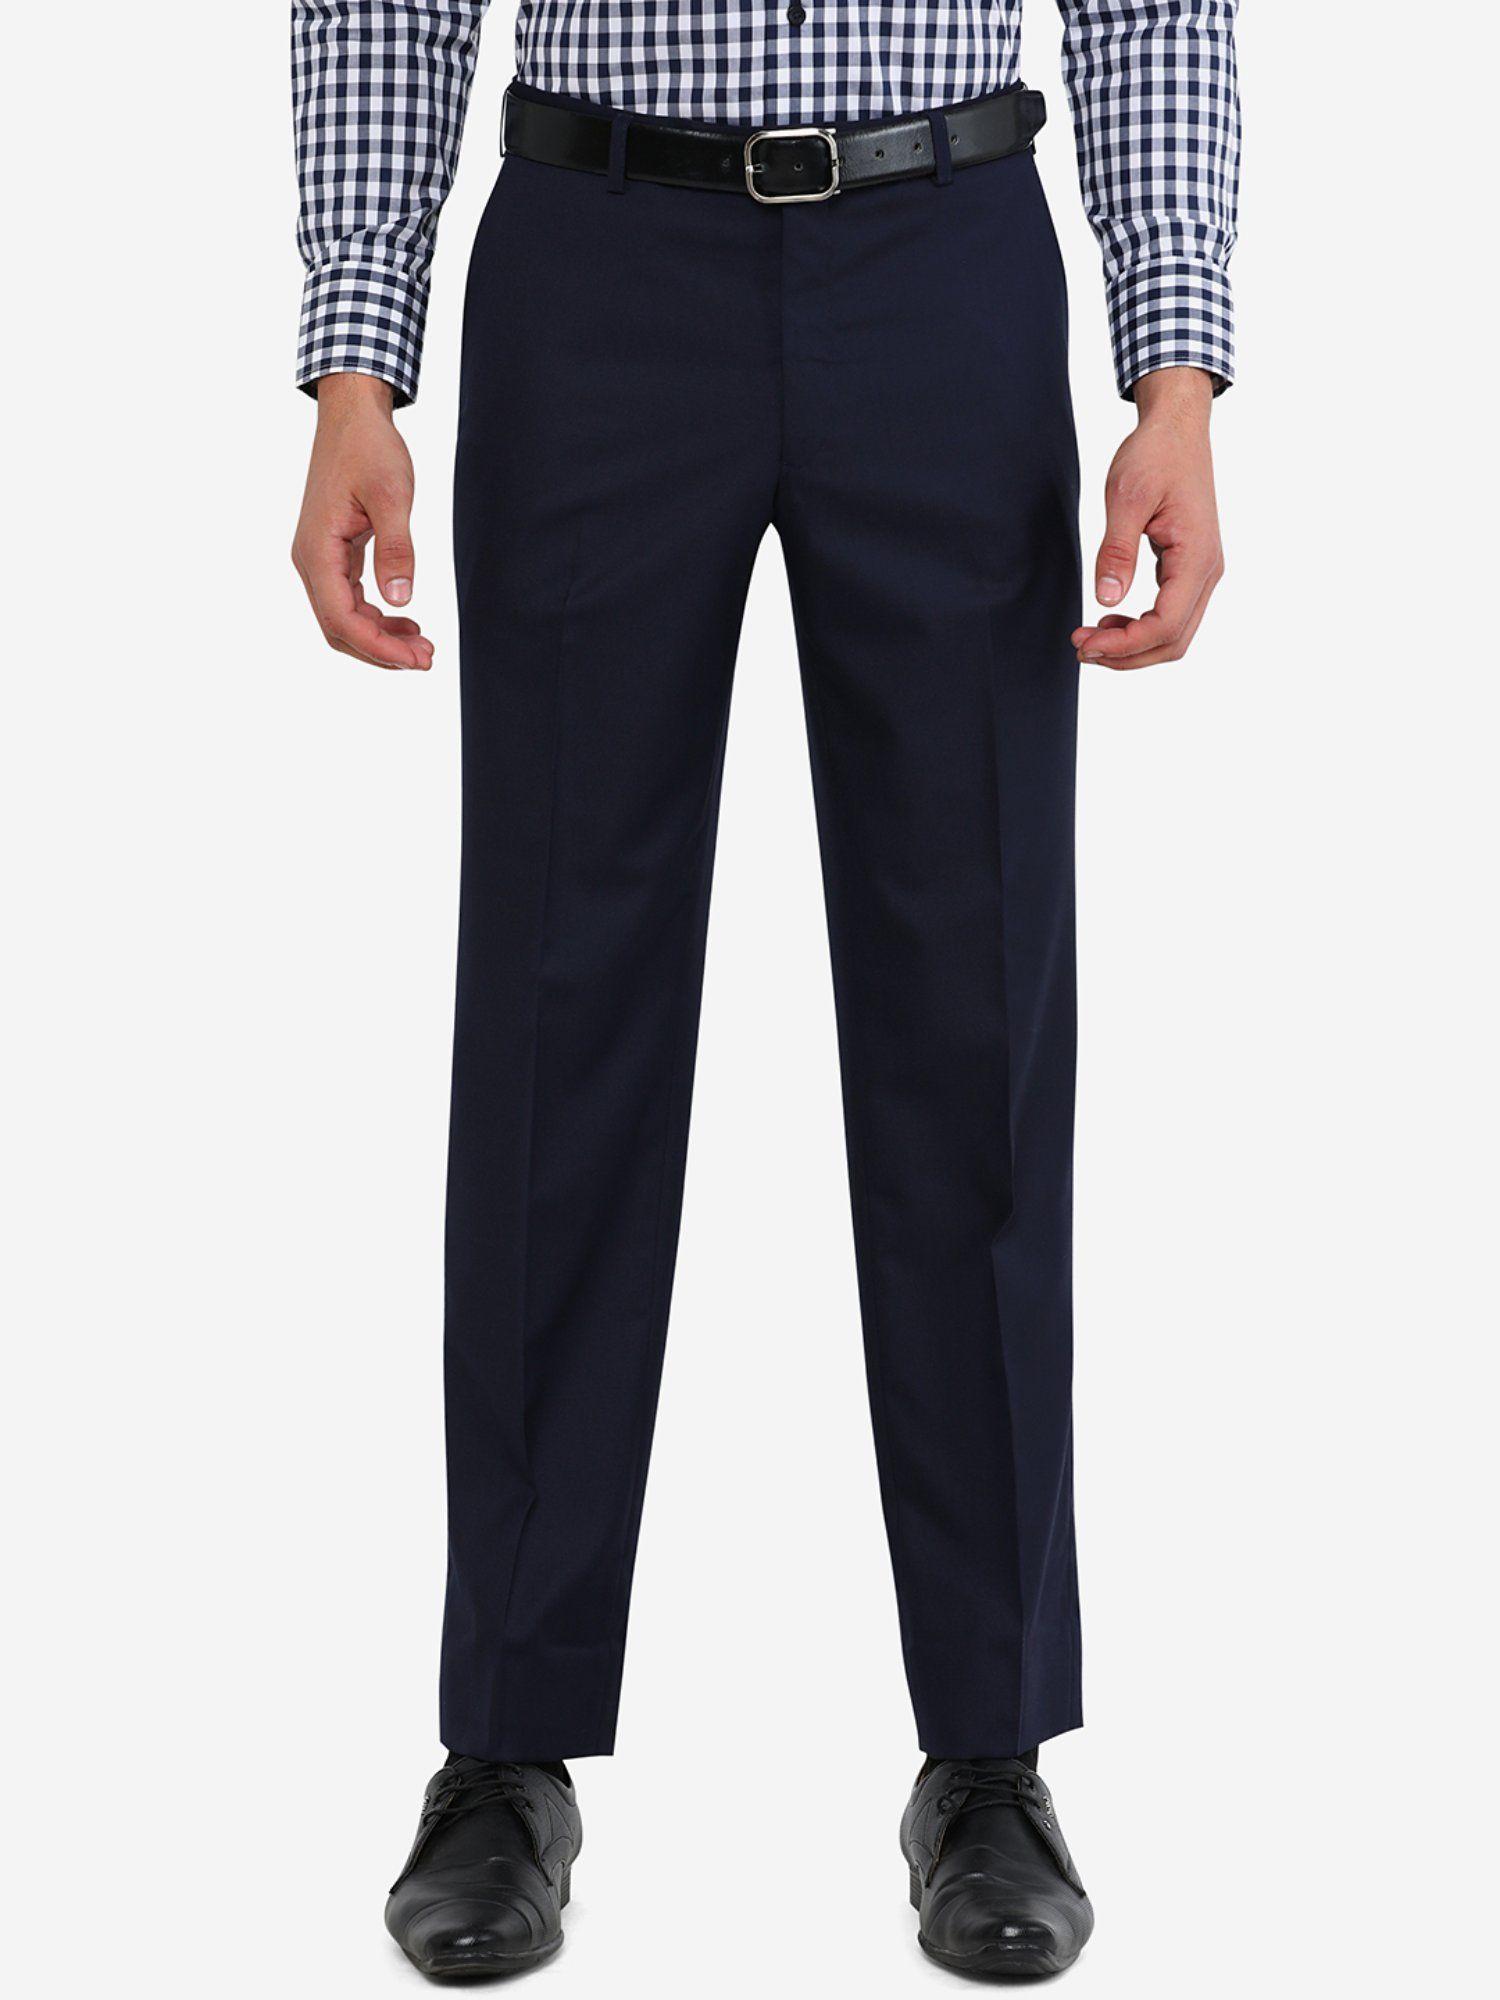 mens-navy-blue-terry-wool-classic-fit-solid-formal-trouser